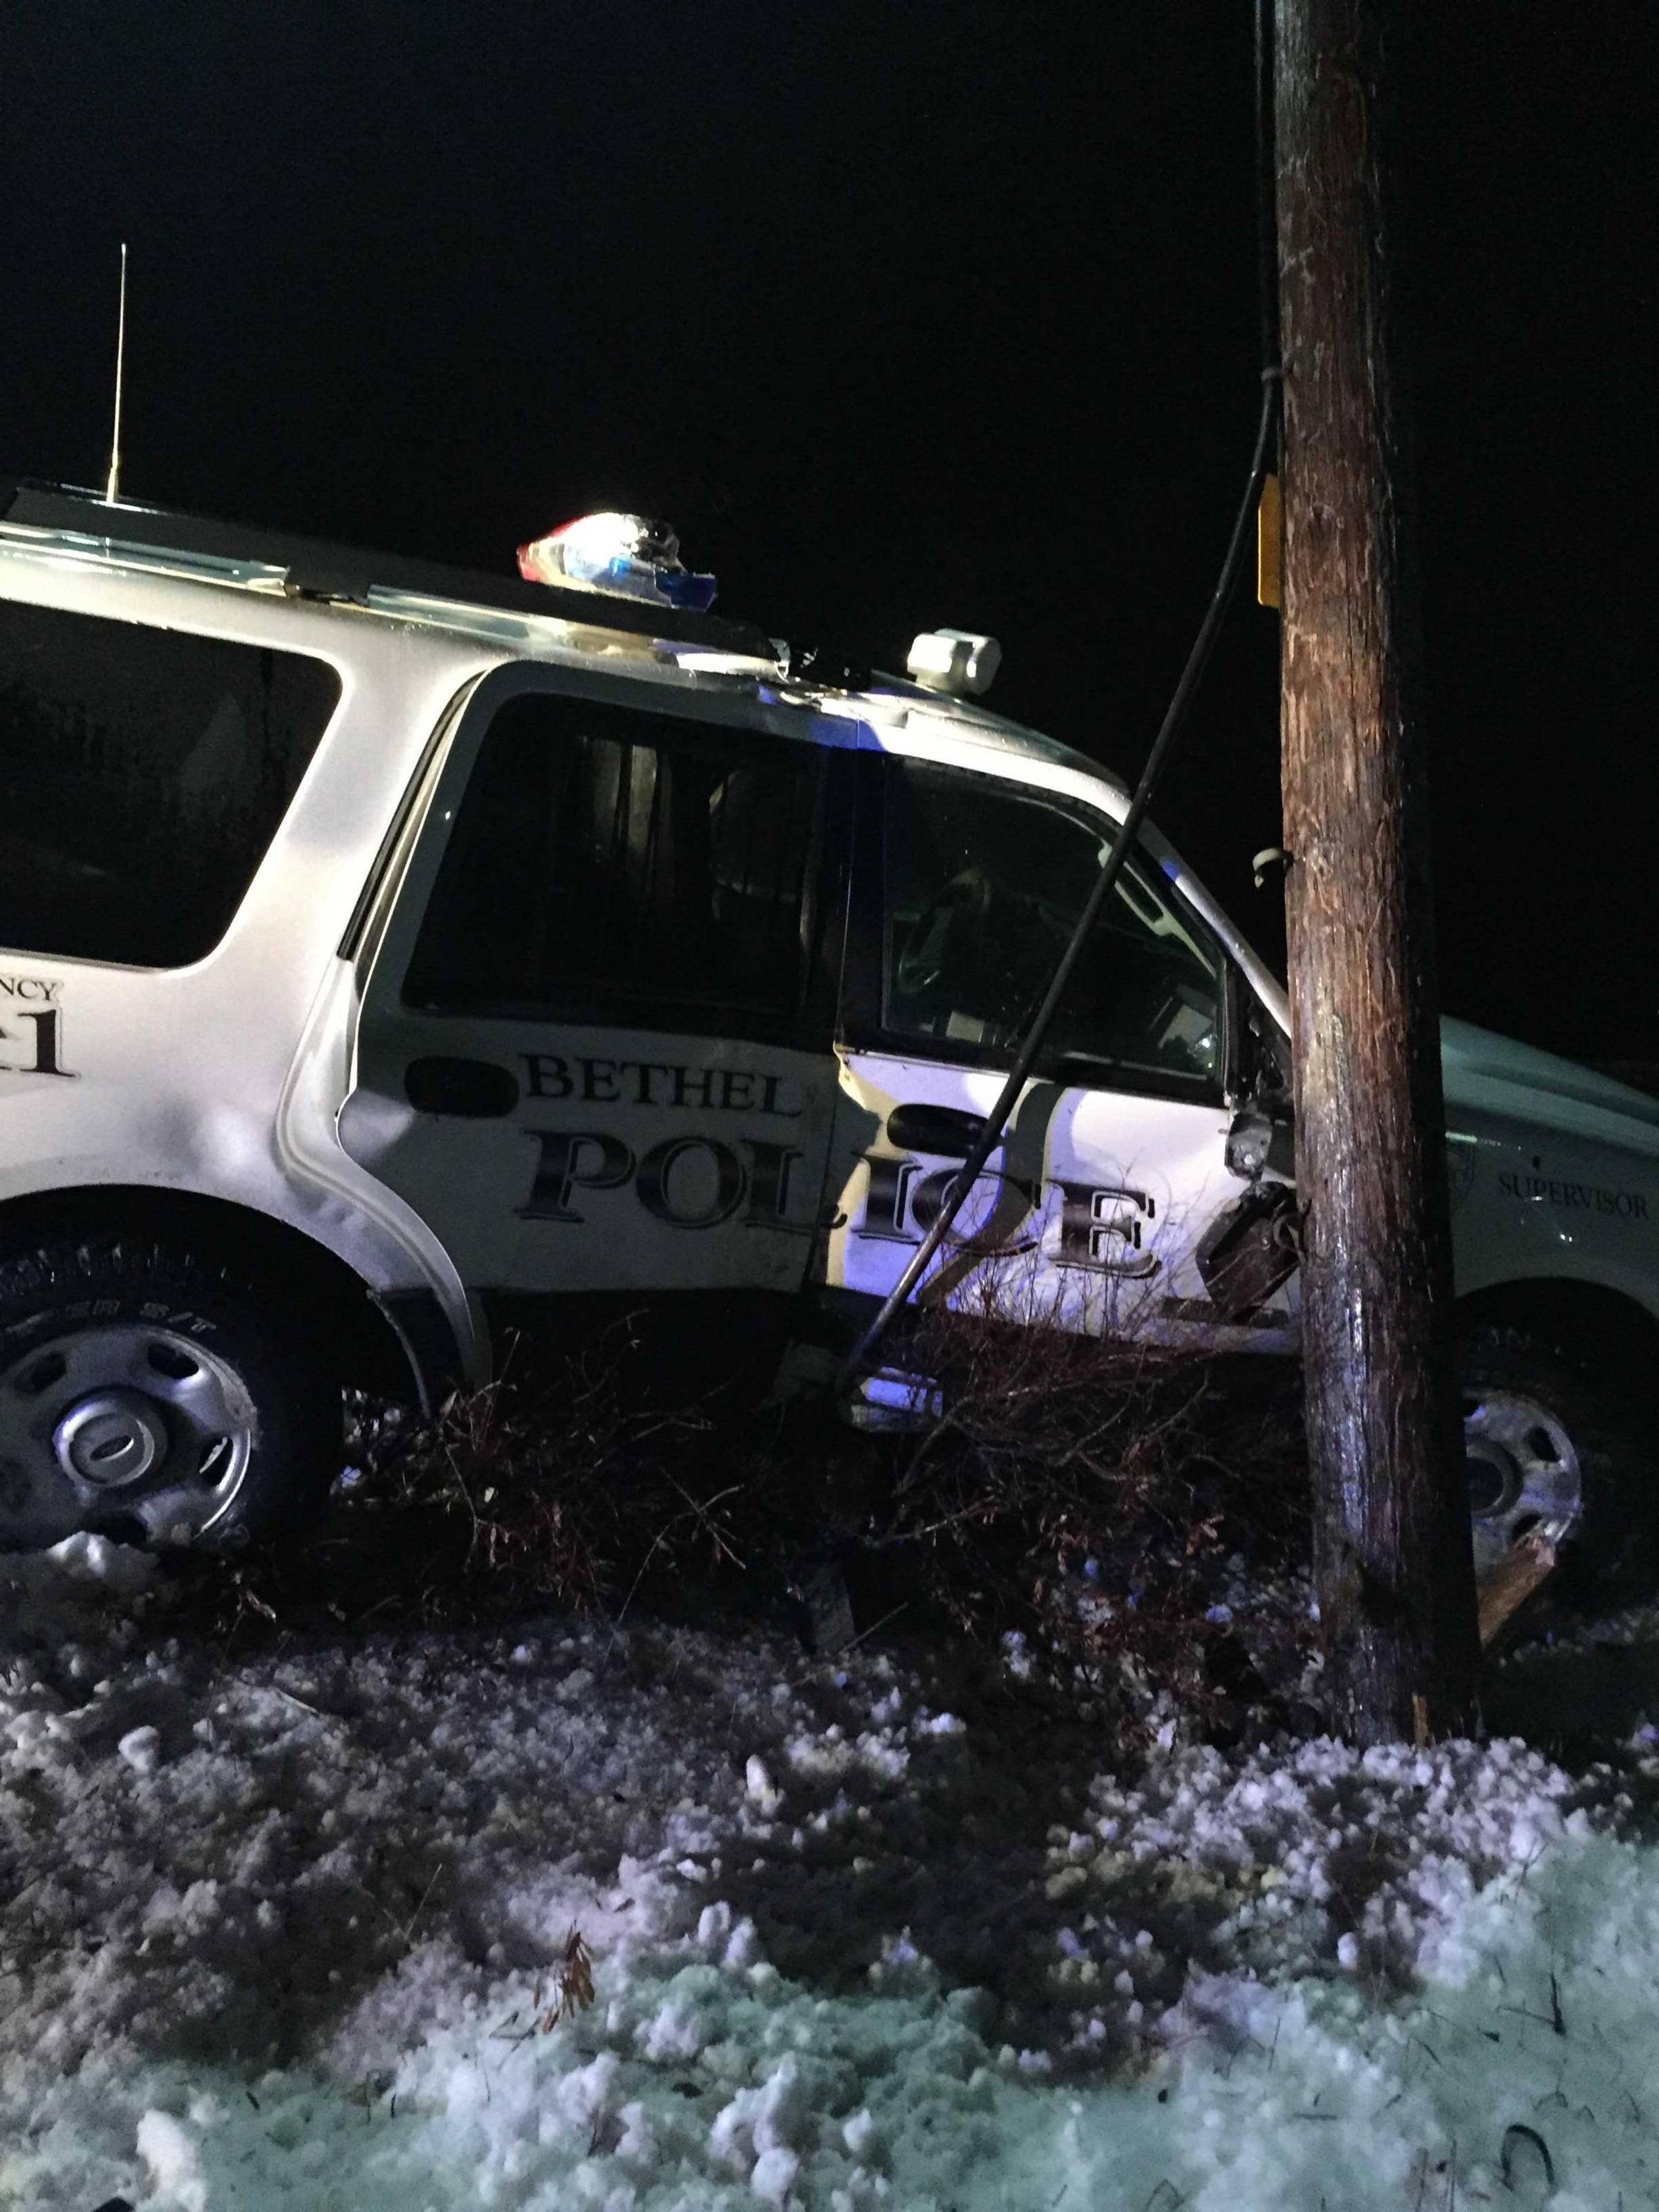 Damage from the vehicle's collision with the electrical pole (Photo courtesy of Bethel Police Department)